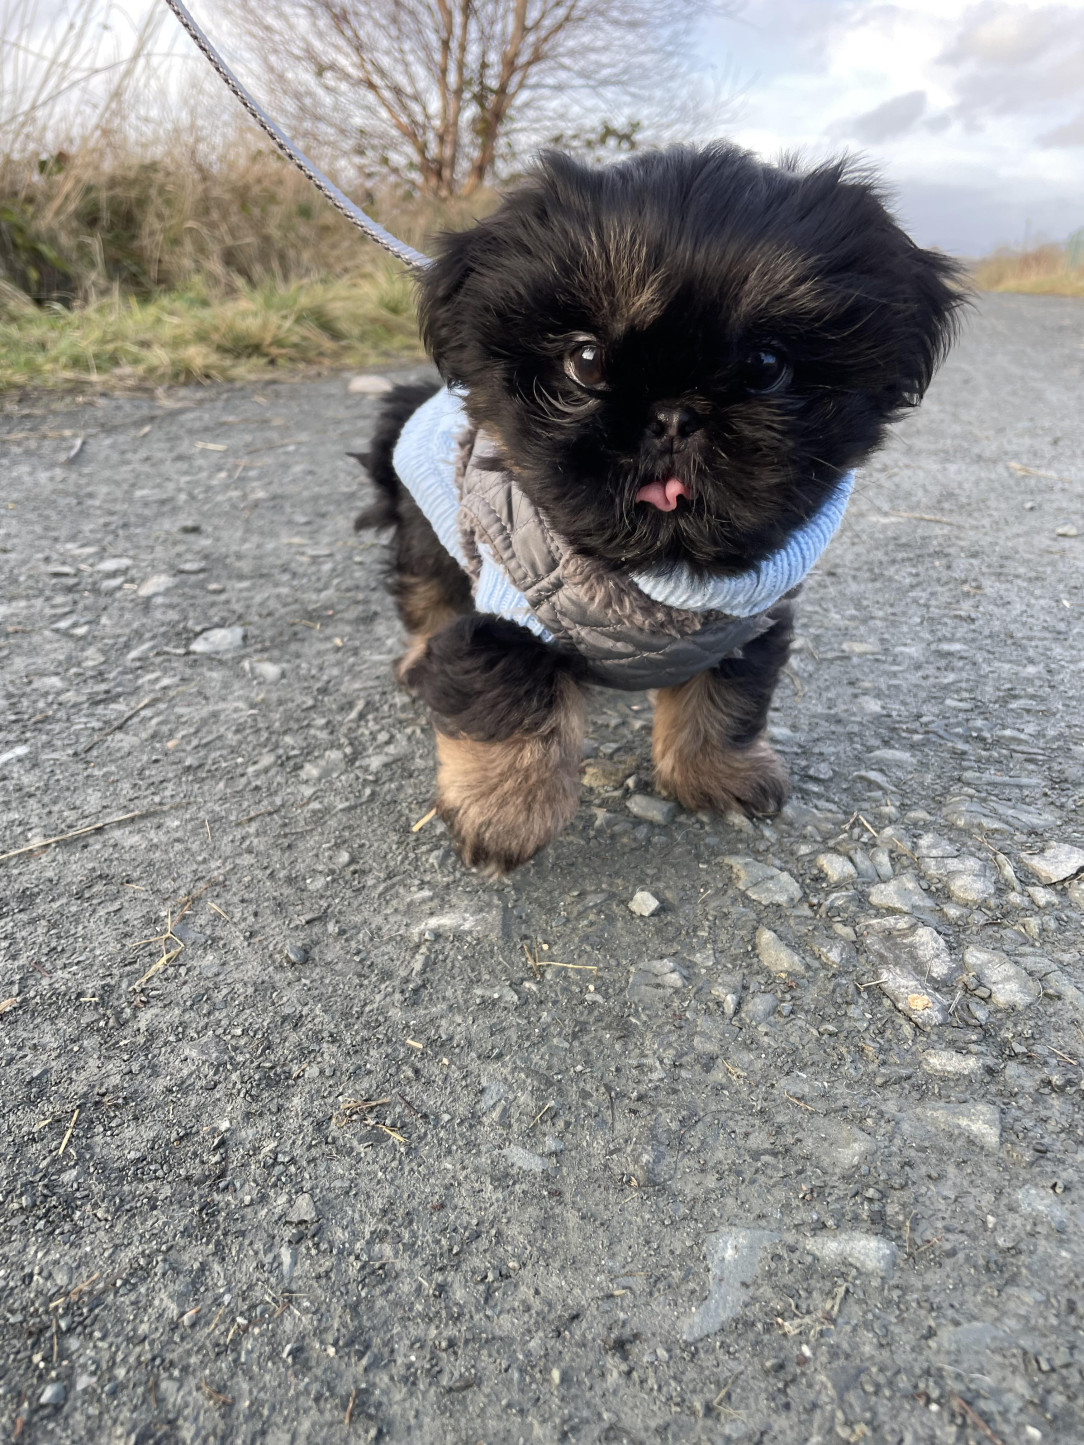 He went for his first walk